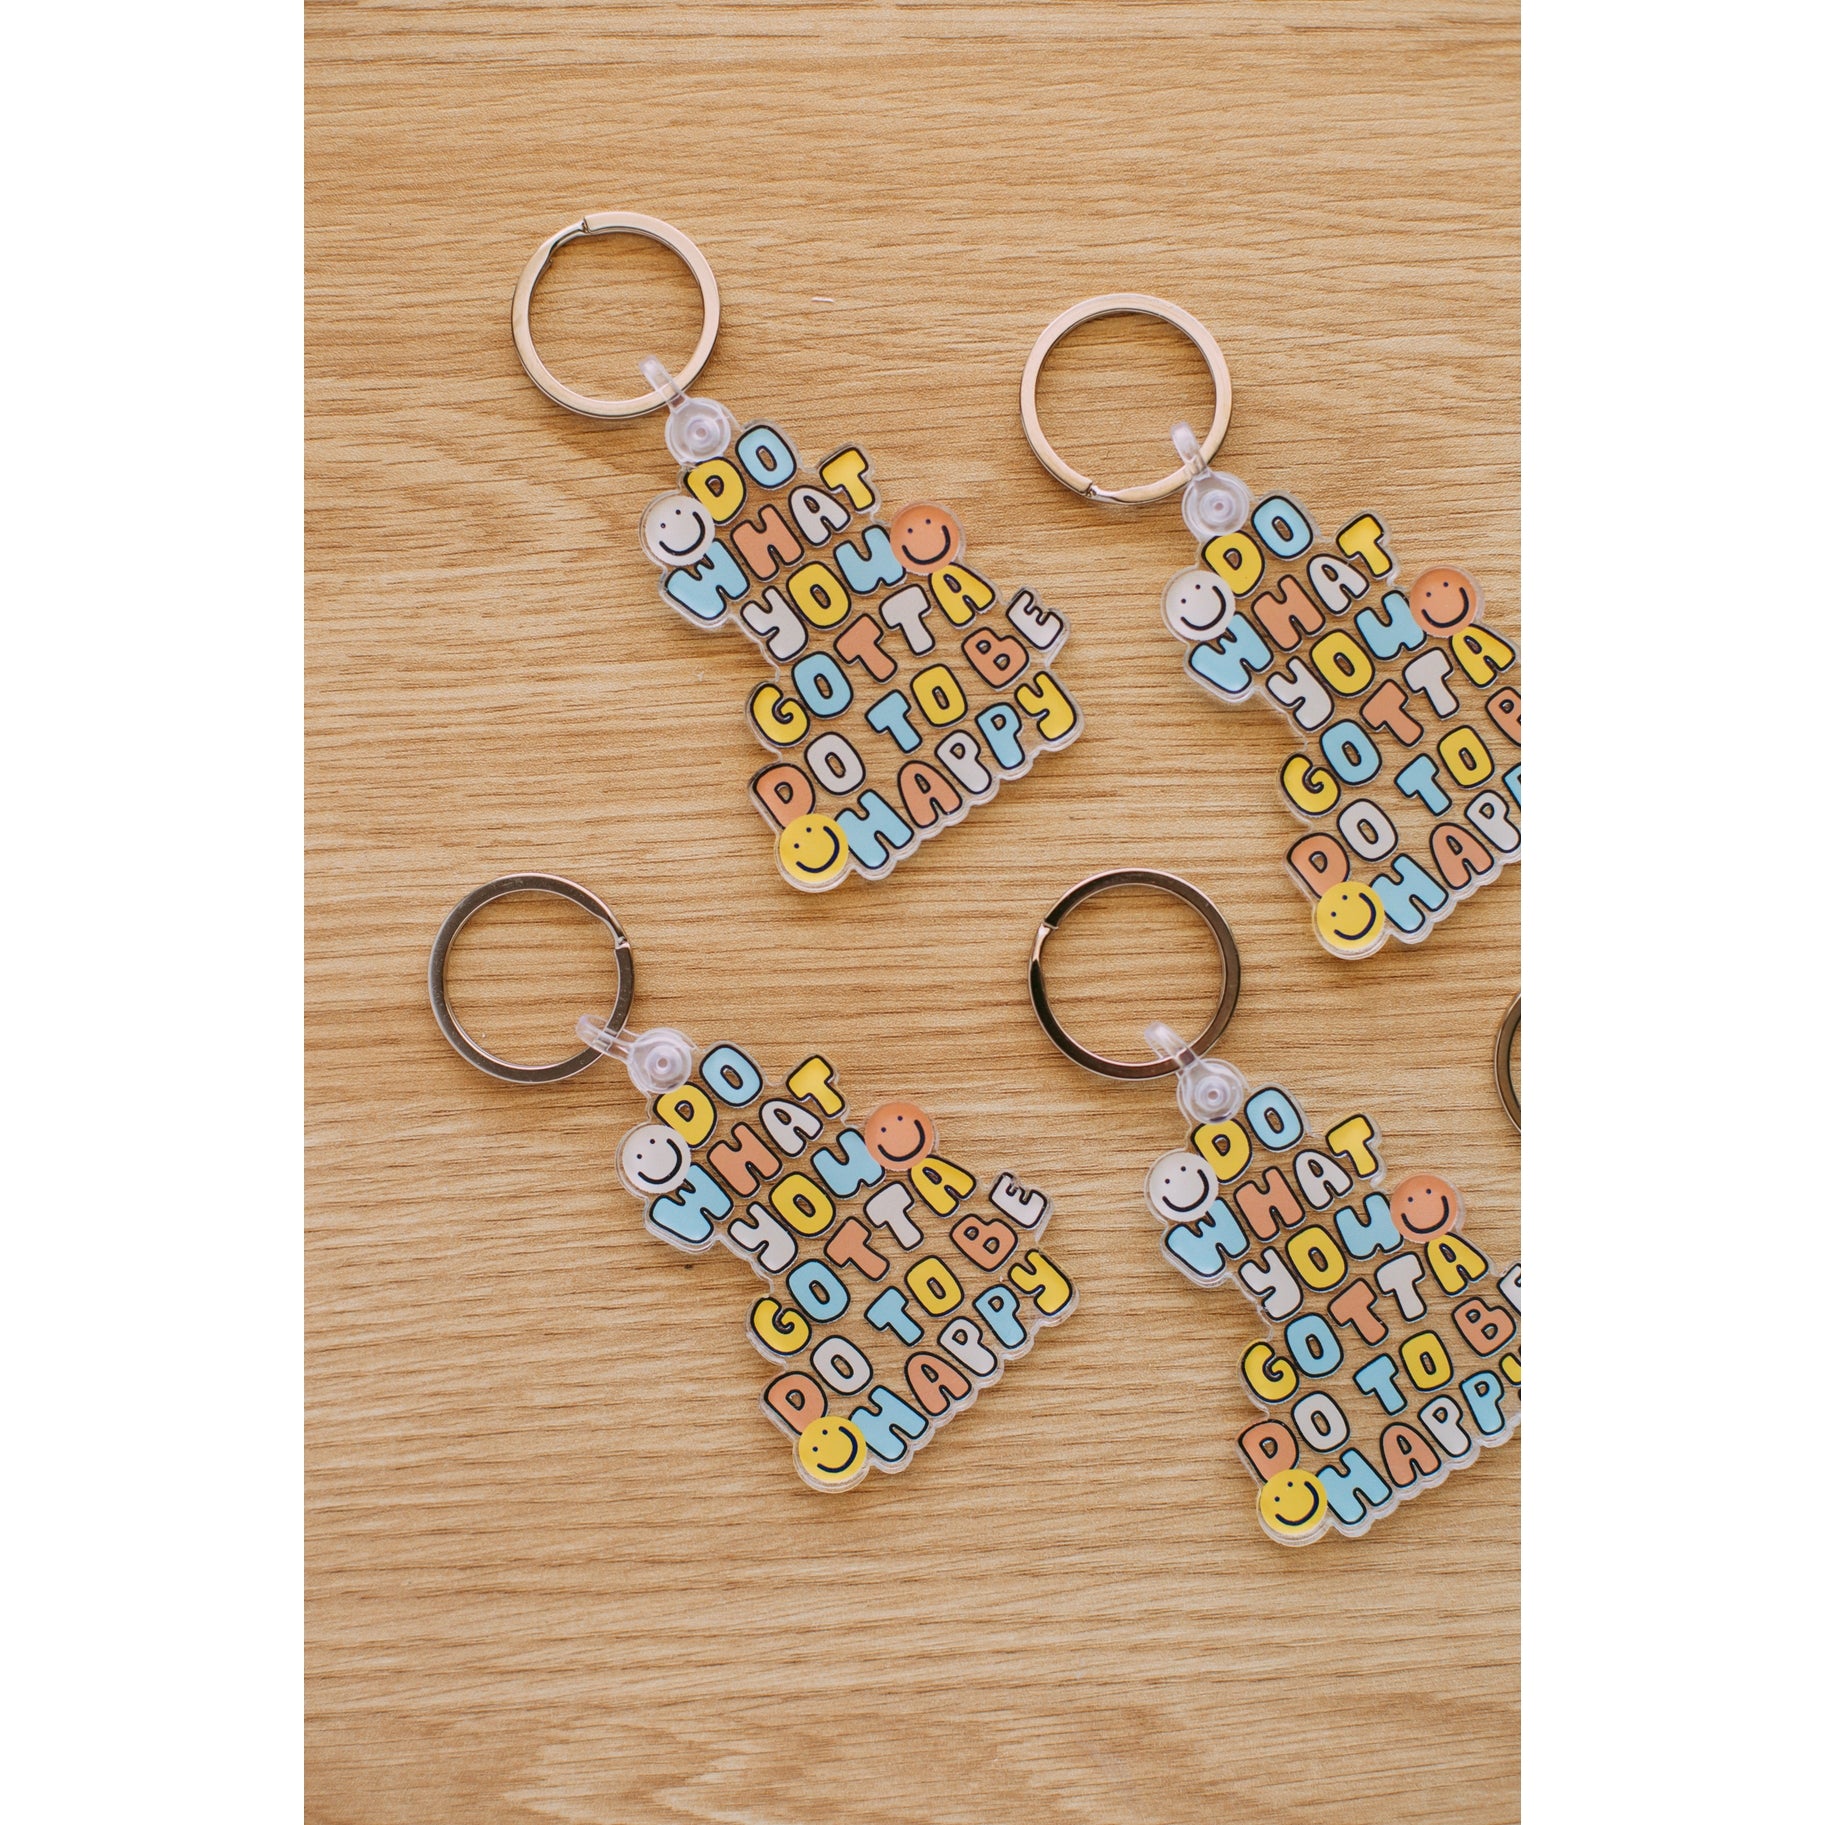 To Be Happy Keychain,ACCESSORIES,KEYCHAINS, SMILEY FACE- DEFIANT